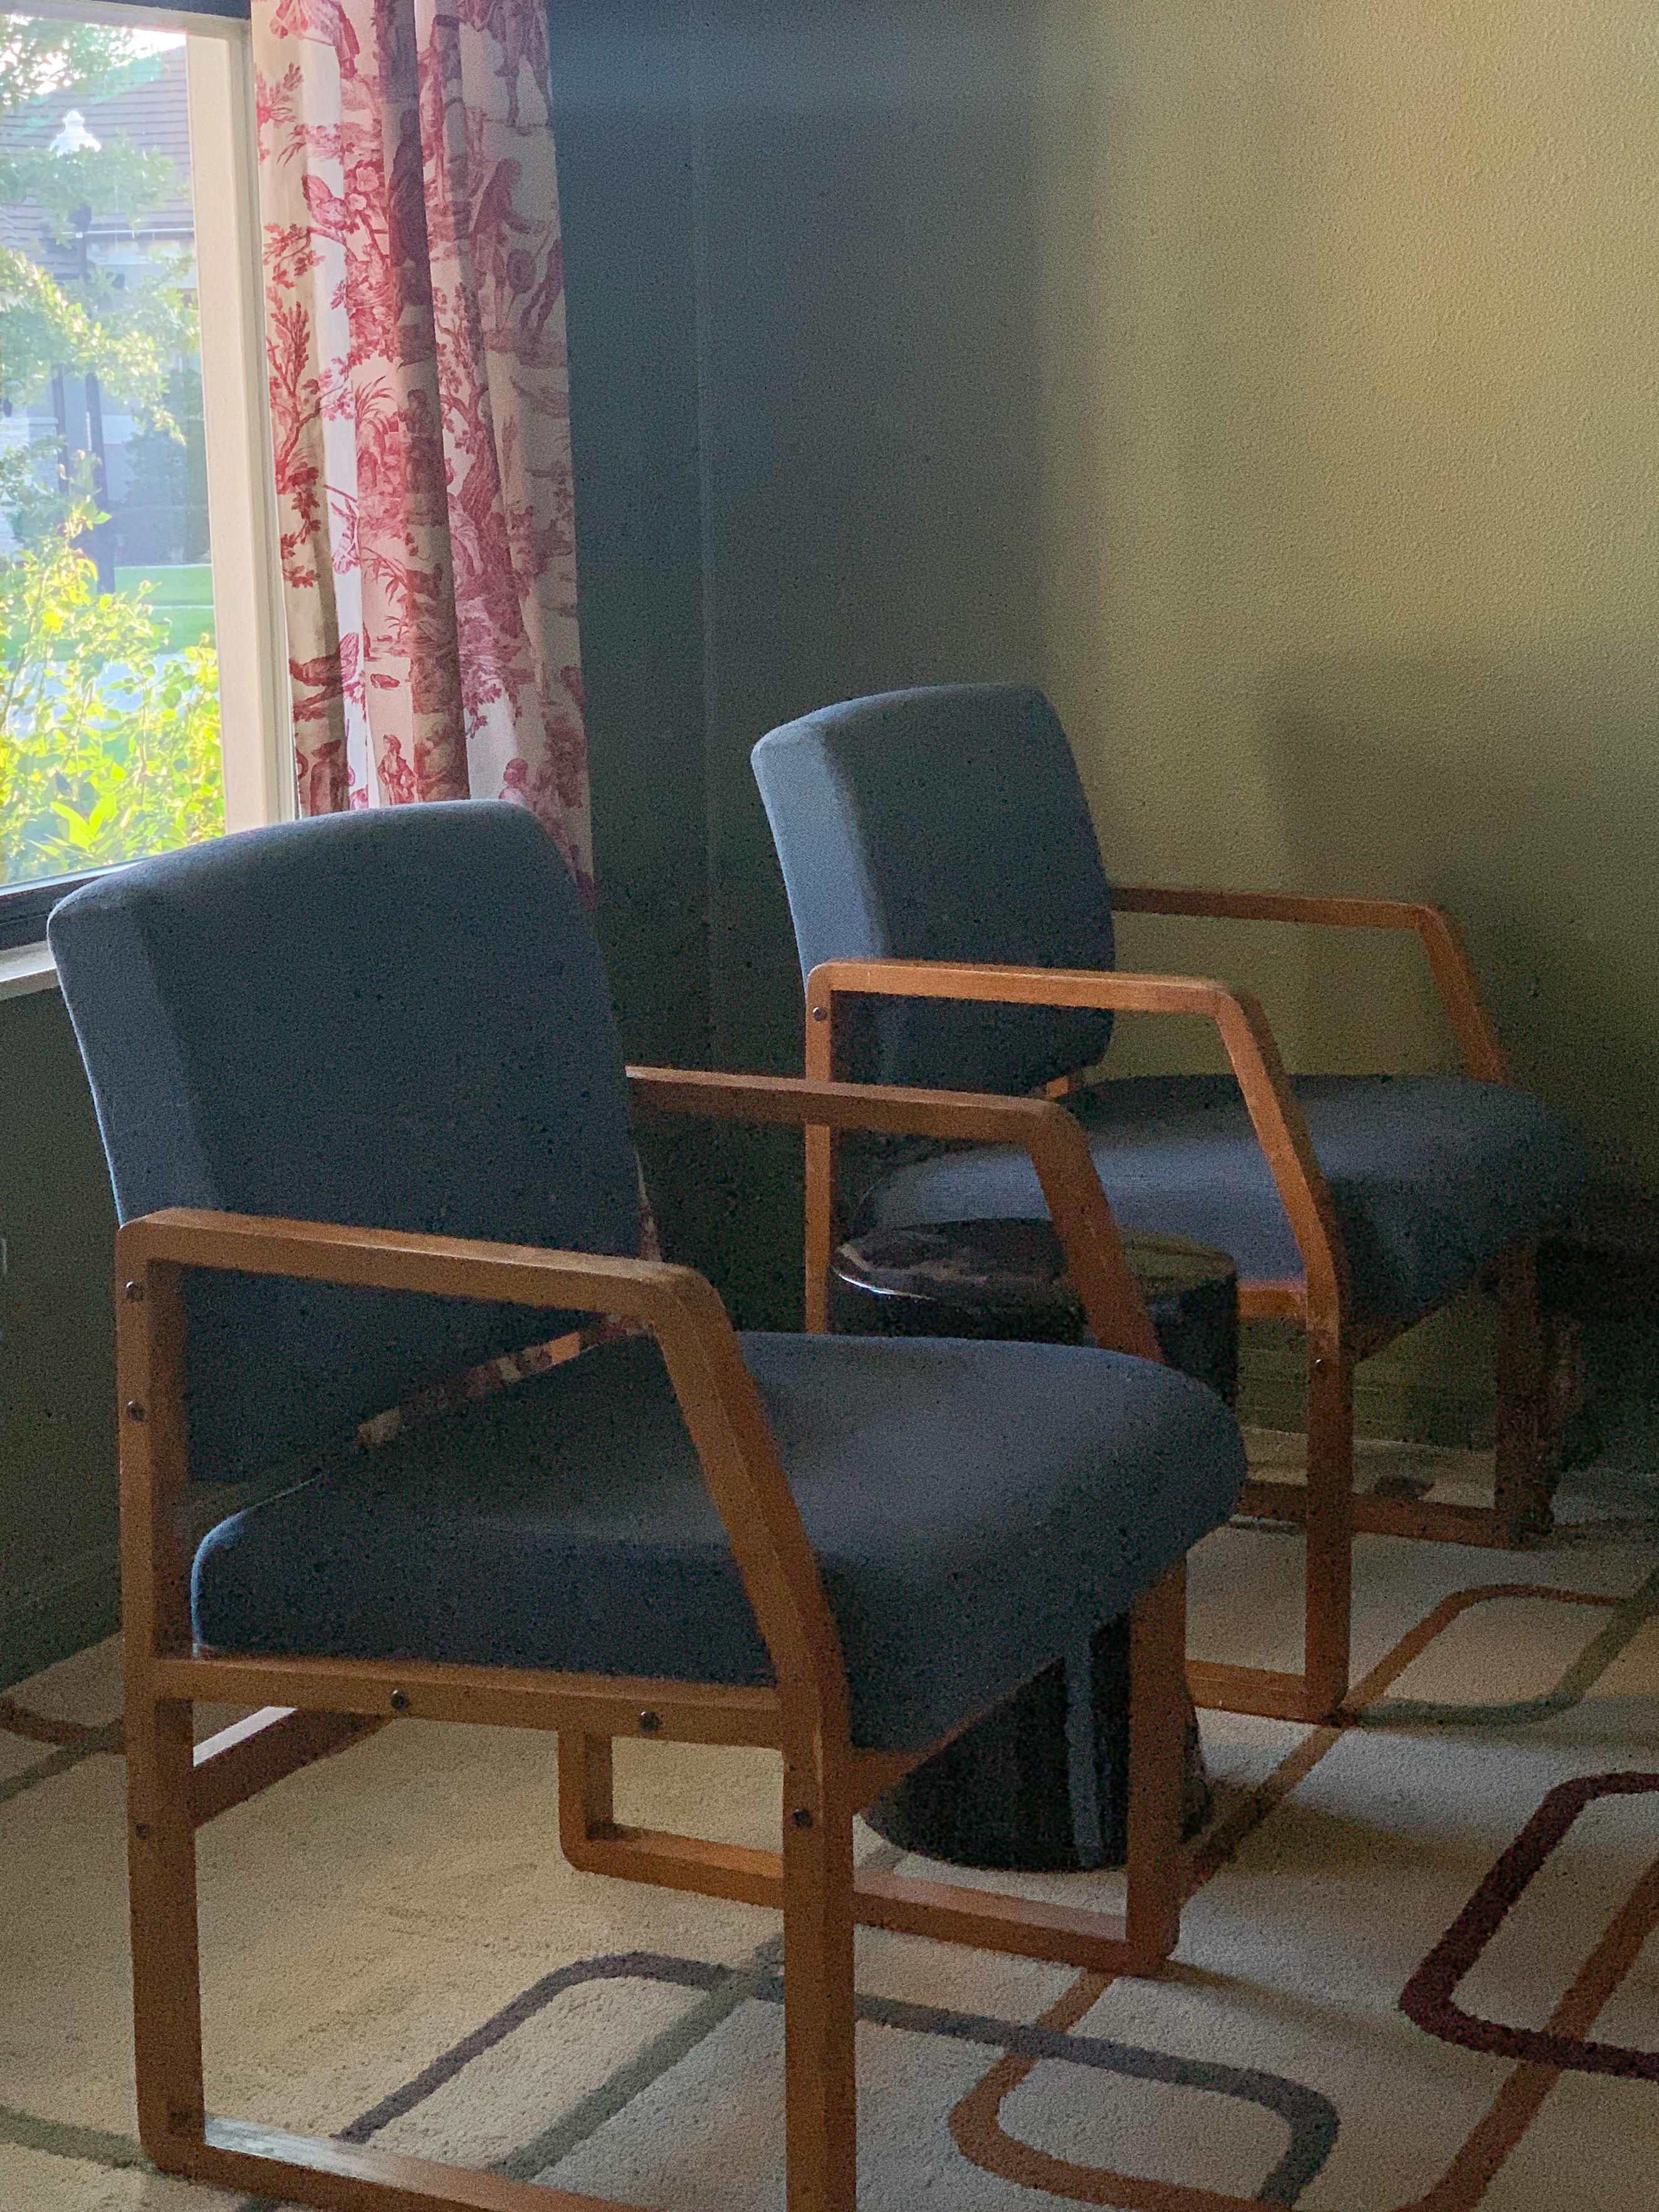 Geometric Bentwood Style Mid-Century Chair custom made by HighPoint Furniture NC. Angular framing constructed from Walnut & upholstered in a STEEL BLUE fabric supported by high quality medium density foam. Est. production from the 1970's High Point